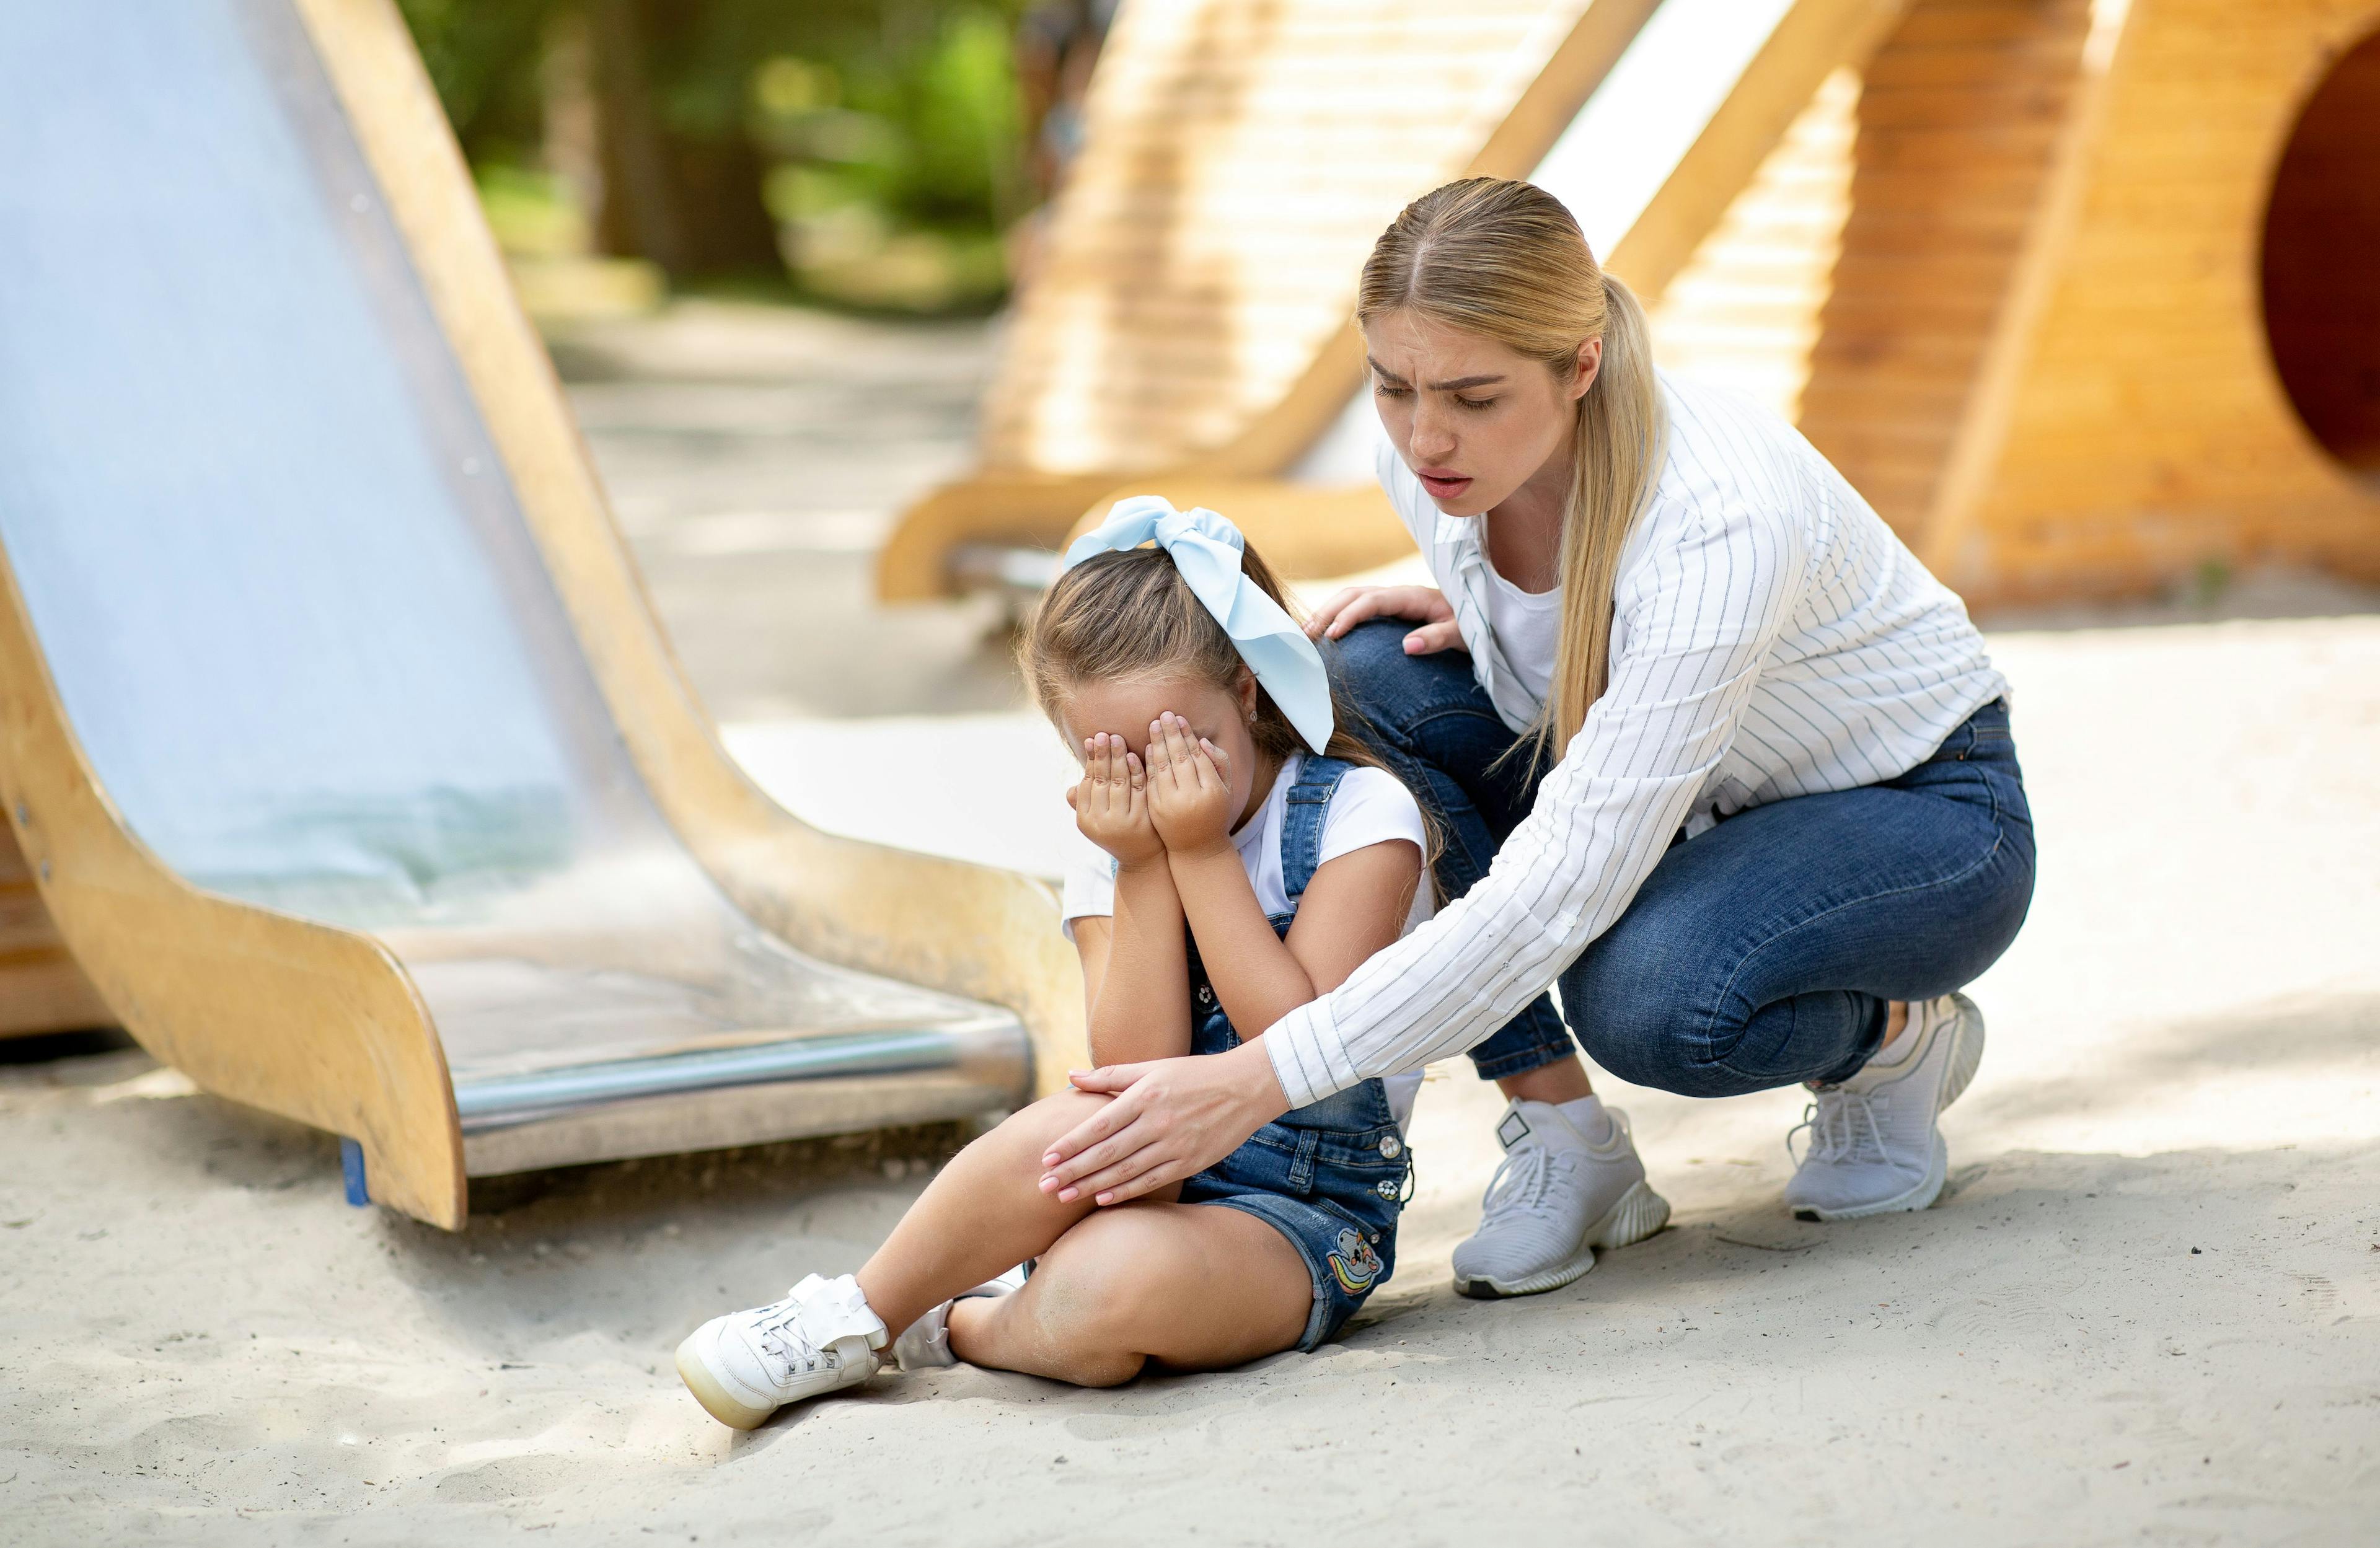 Image related to Playground Injuries: Liability of Property Owners and Equipment Safety